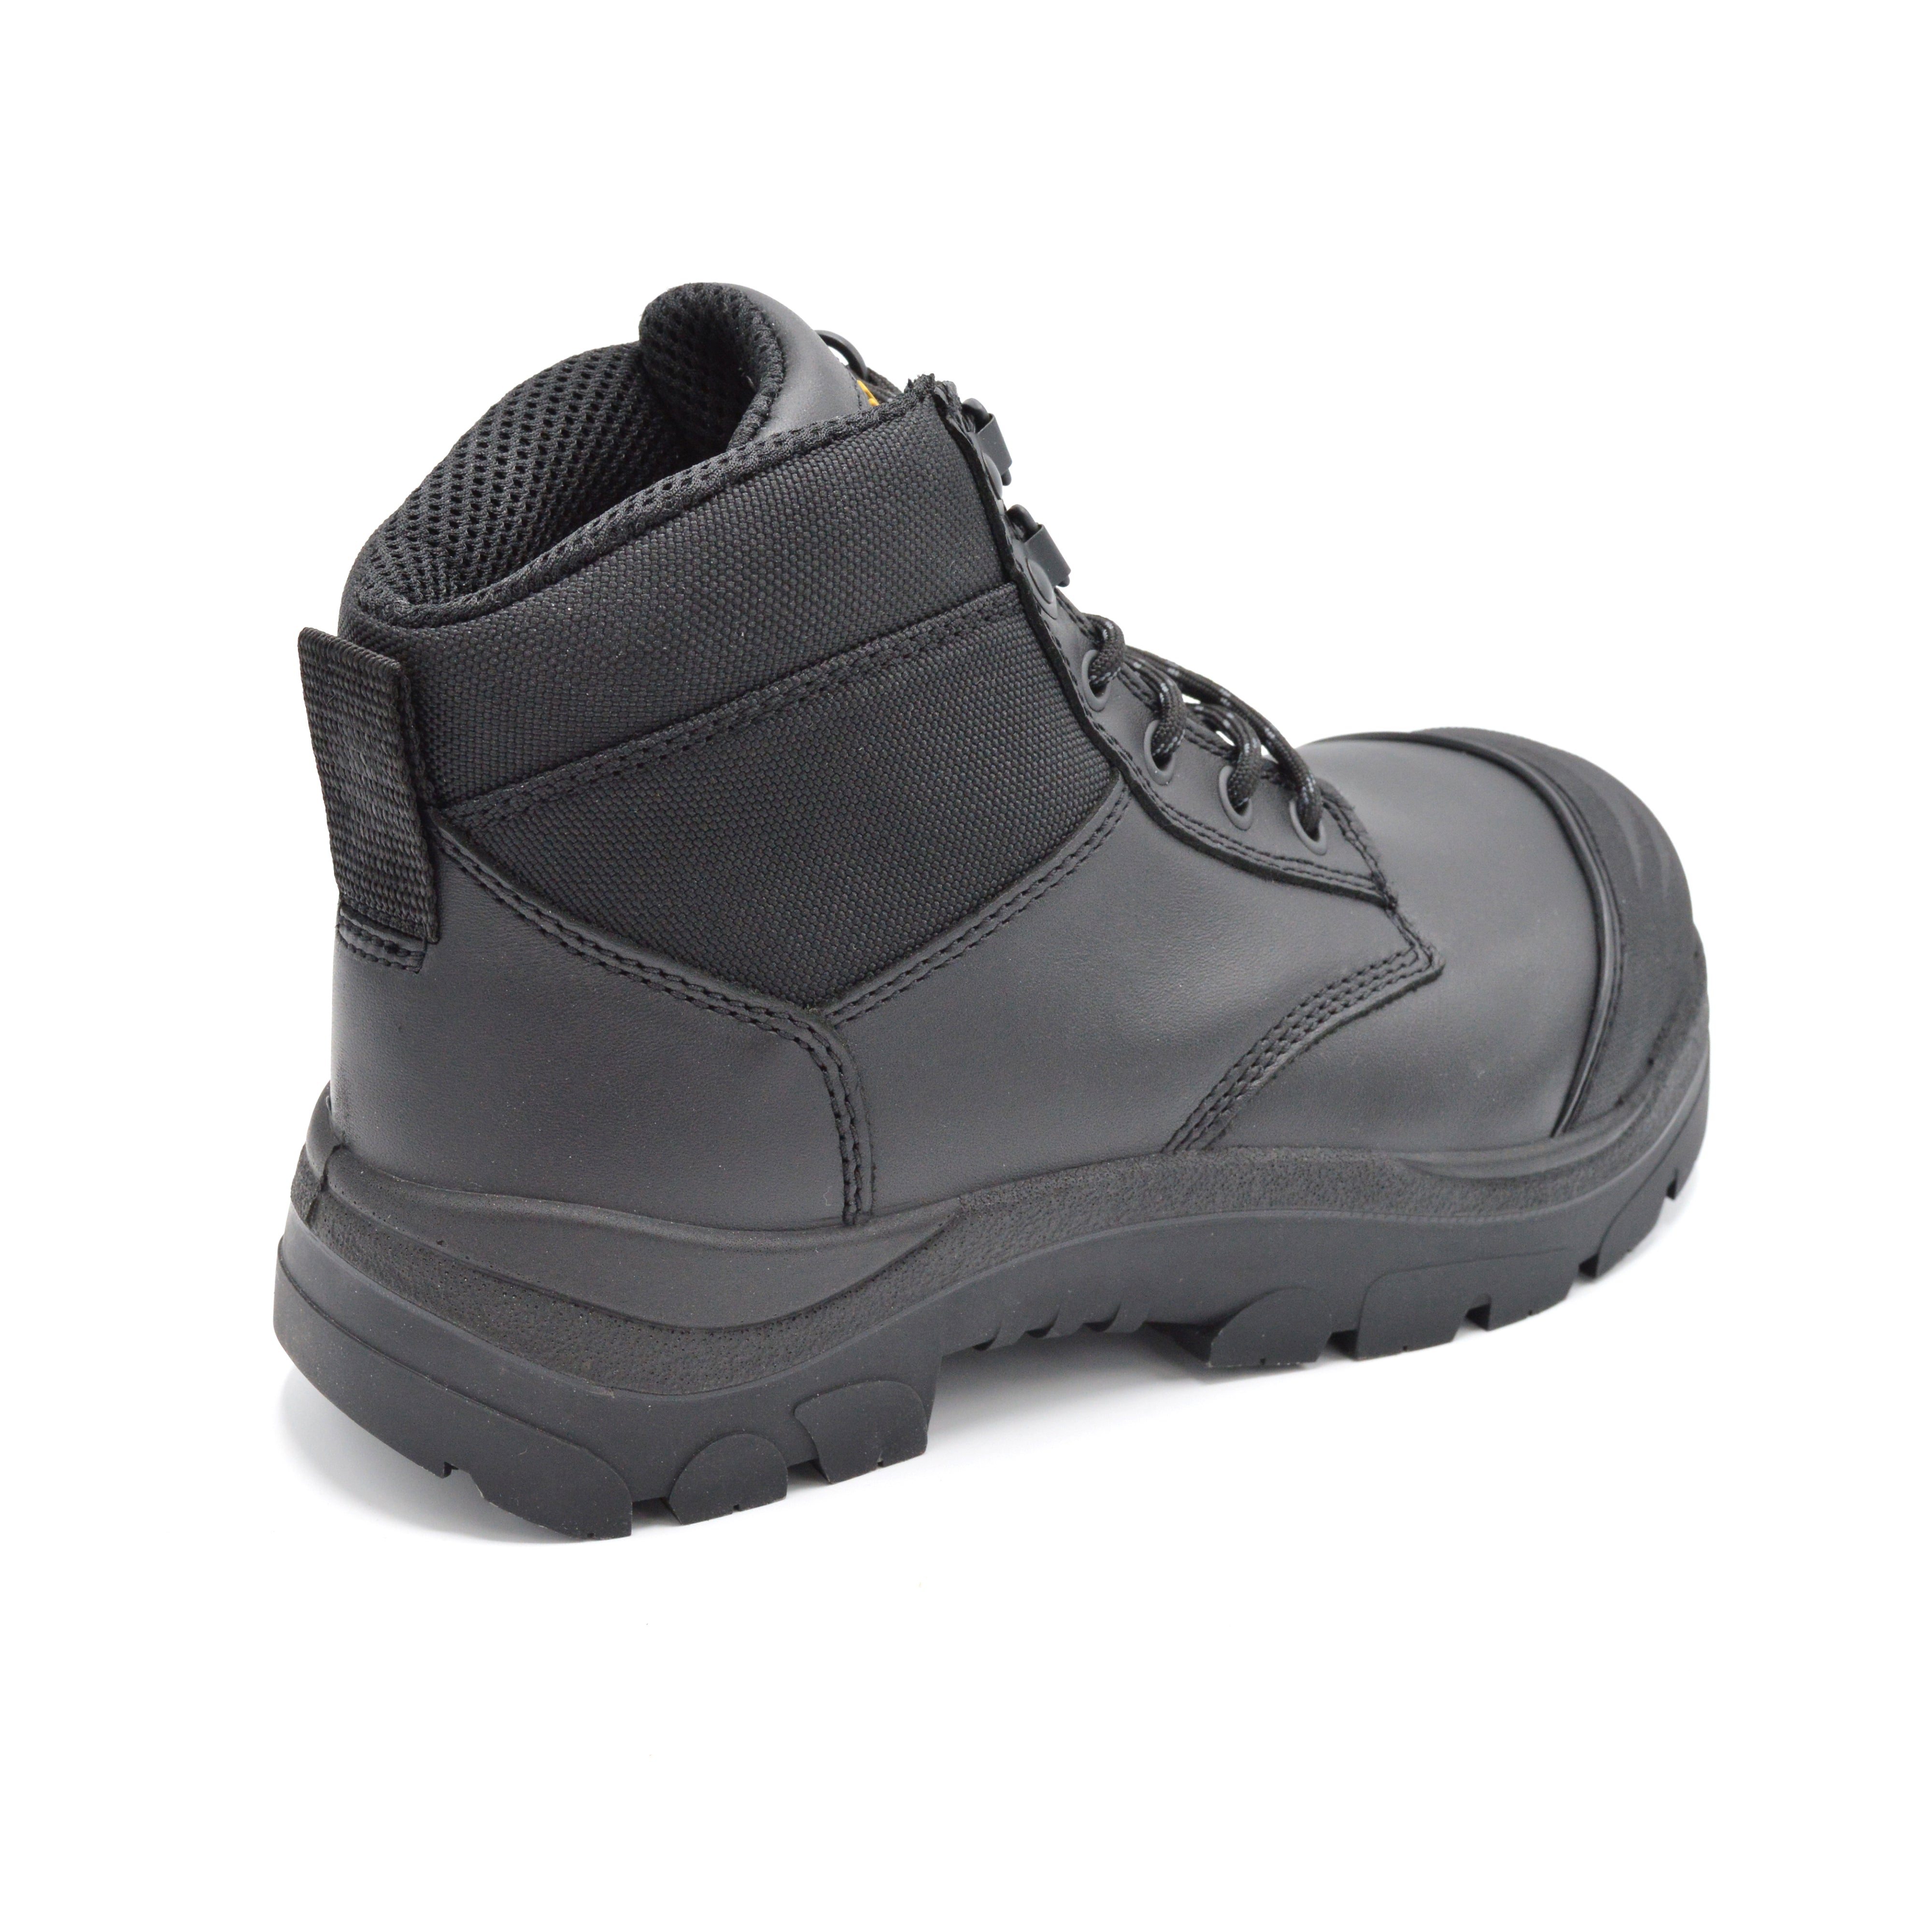 WideLoad 690BLWC - Extra Wide S3 Composite Toe Safety Boot No Zip  - Airport Friendly - 6E Fit  - Black